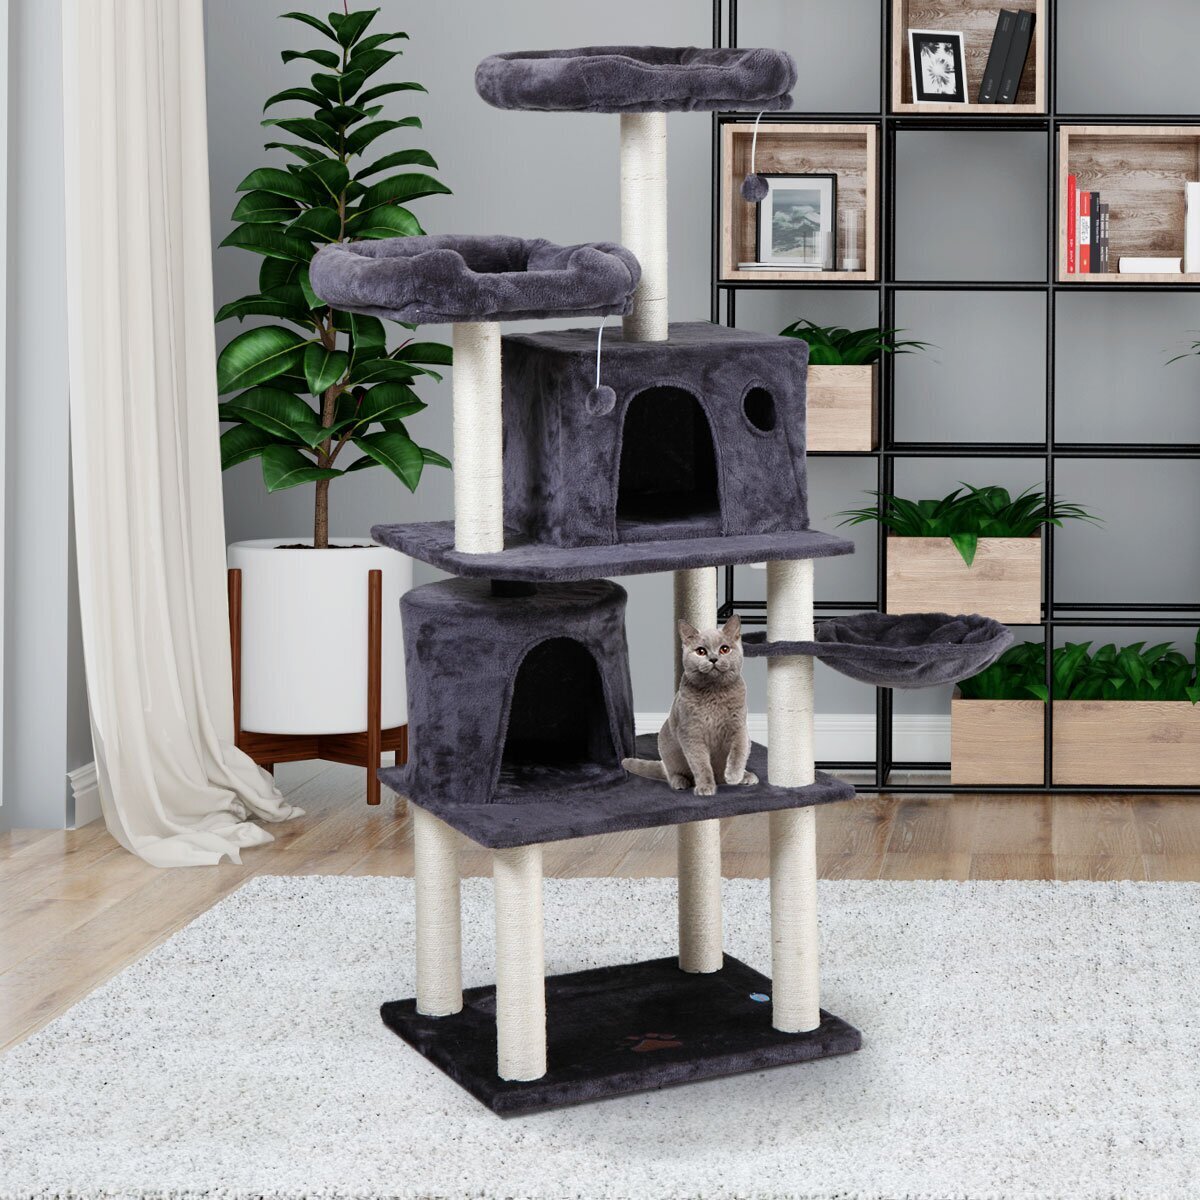 Particleboard Condo Style Cat Tree